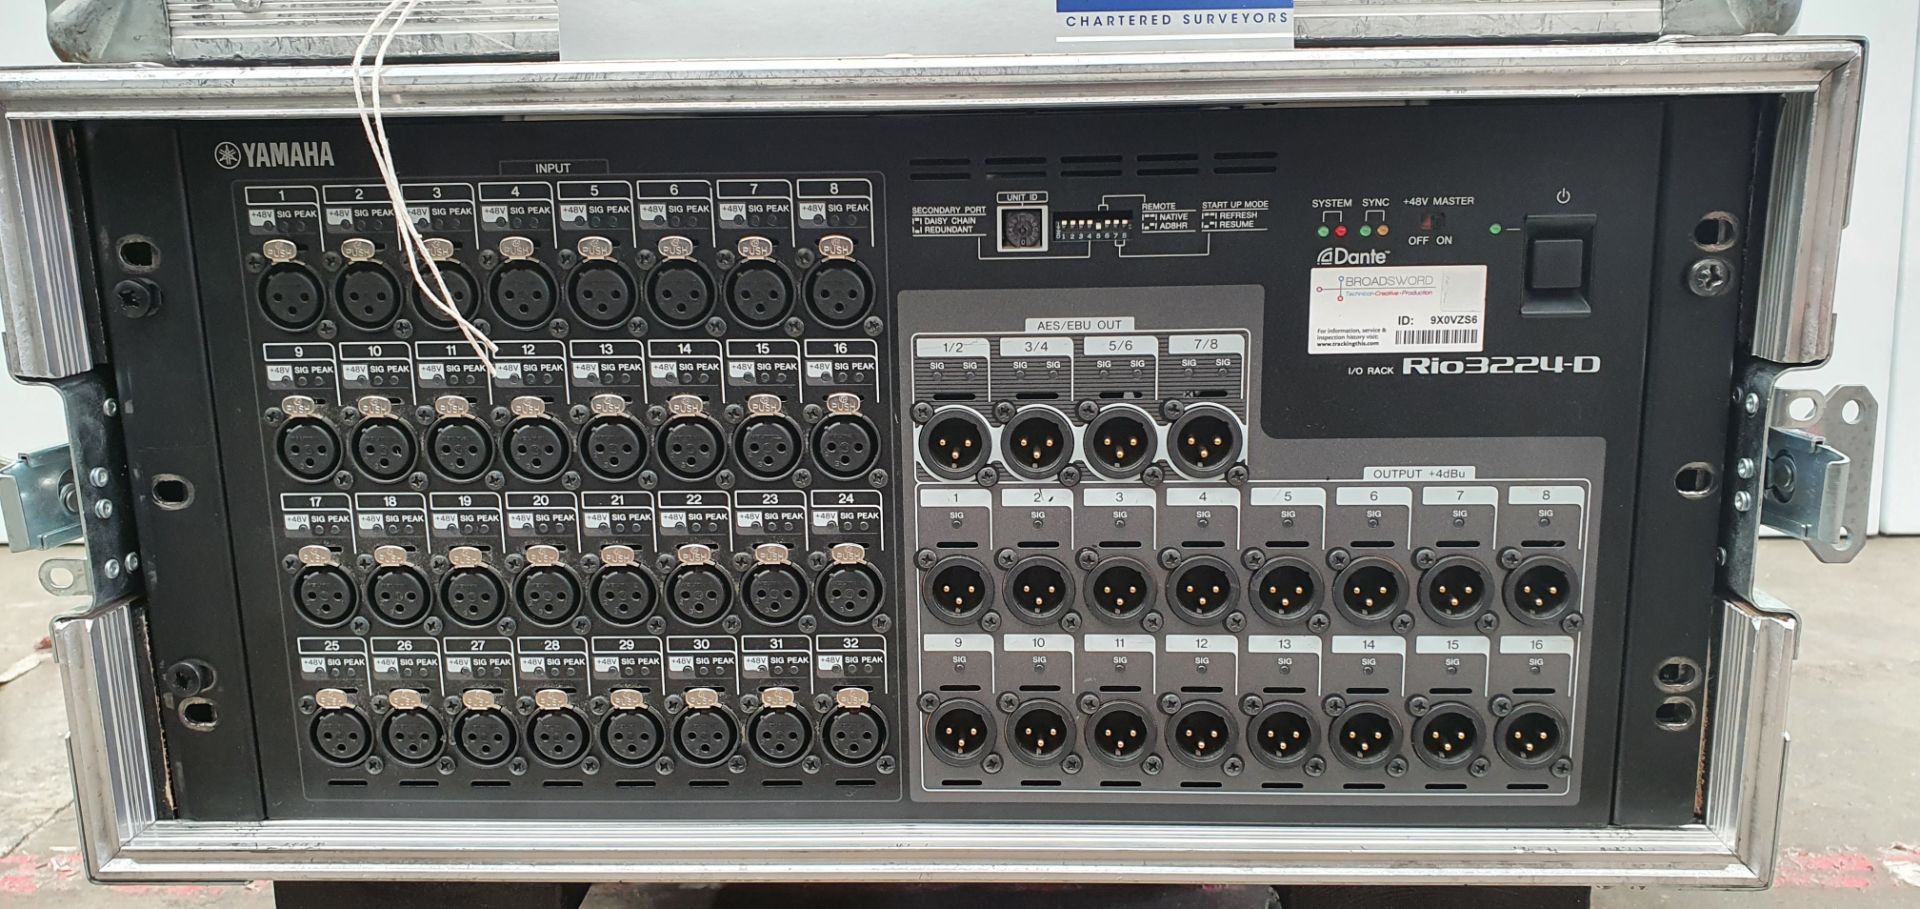 A Yamaha Rio 3224-D Stage Box, 32 Inputs, 16 Outputs No.BAWN01014 with 5star mobile flight case. - Image 2 of 4